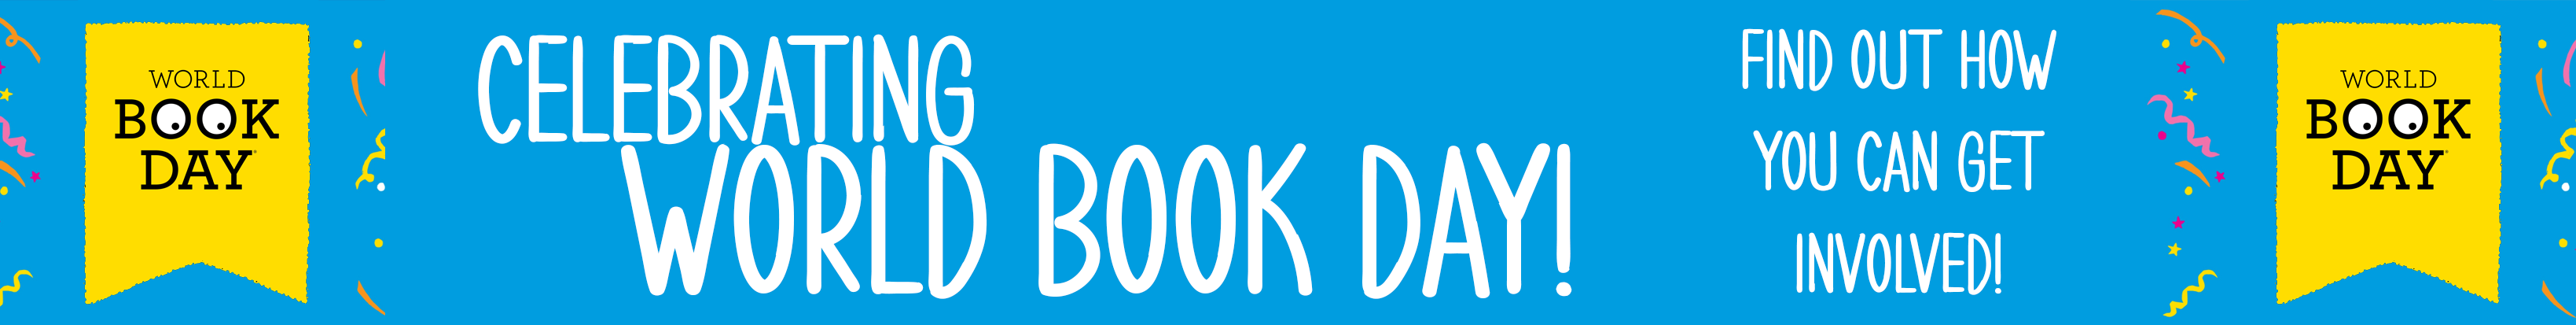 Celebrating World Book Day - Find out how you can get involved